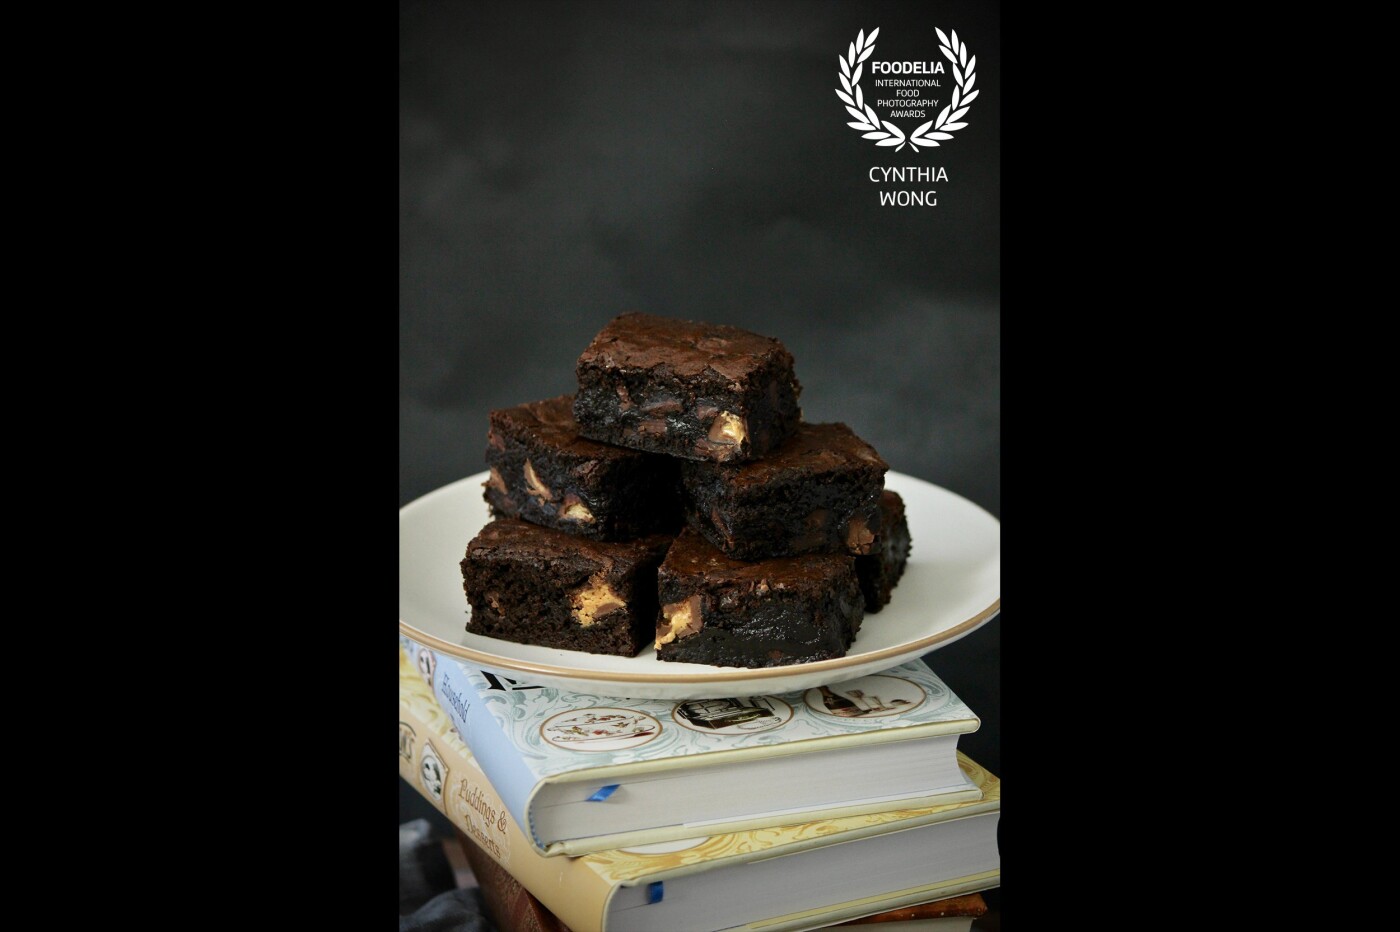 This is one of my favourite brownies using a lot of quality dark chocolates, cocoa powder and mini peanut butter cups. I took this shot as I wanted to capture the lusciousness and moistness of these beautiful gems. 